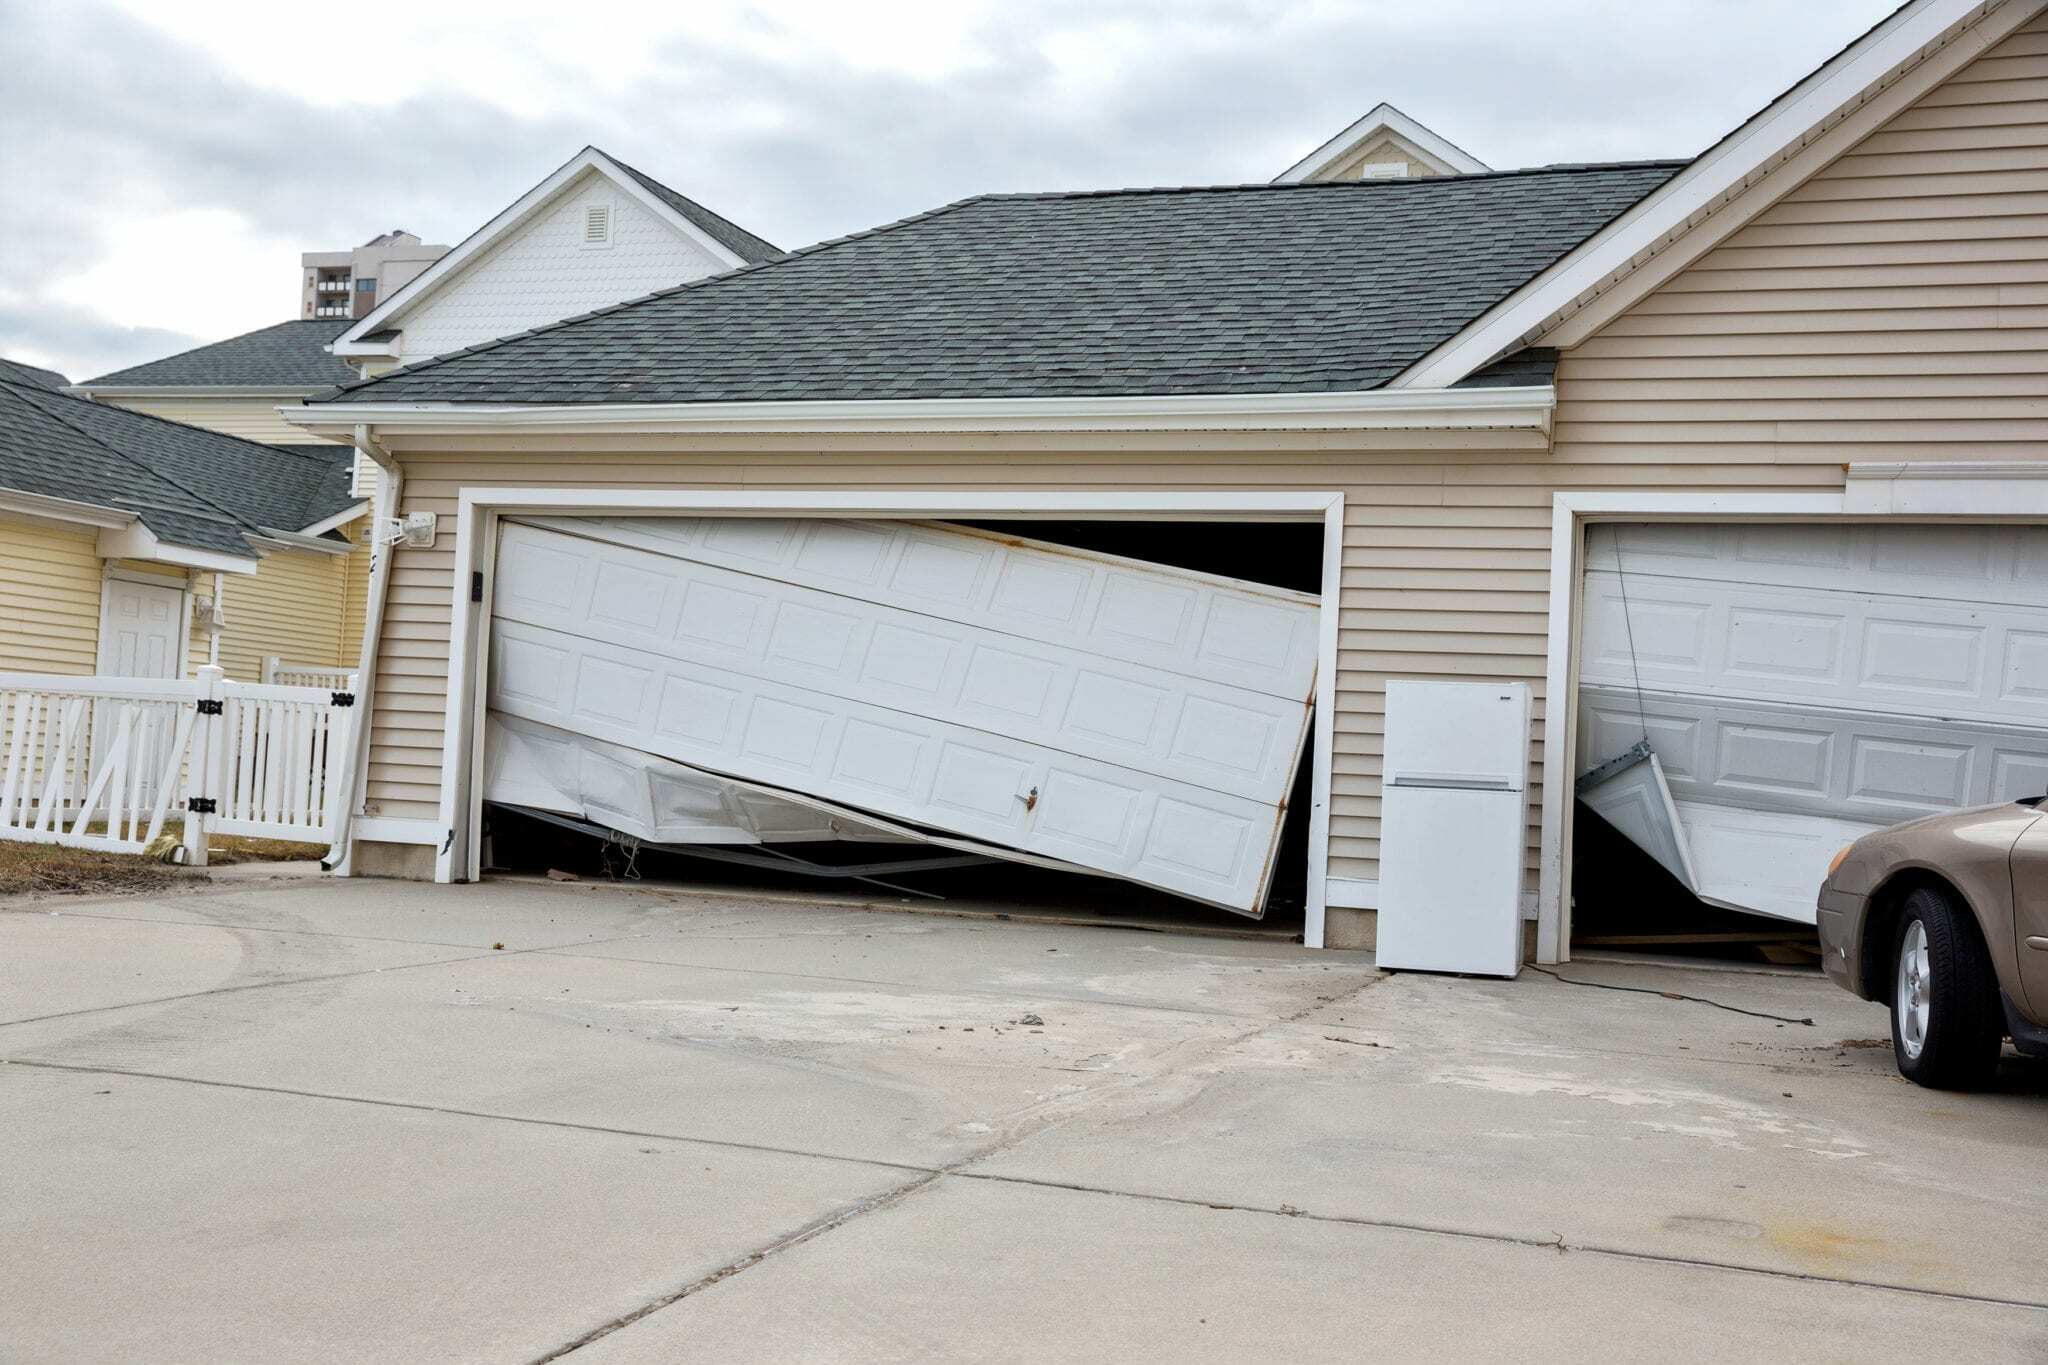 Don’t Panic: Emergency Garage Door Repair Tips to Save the Day